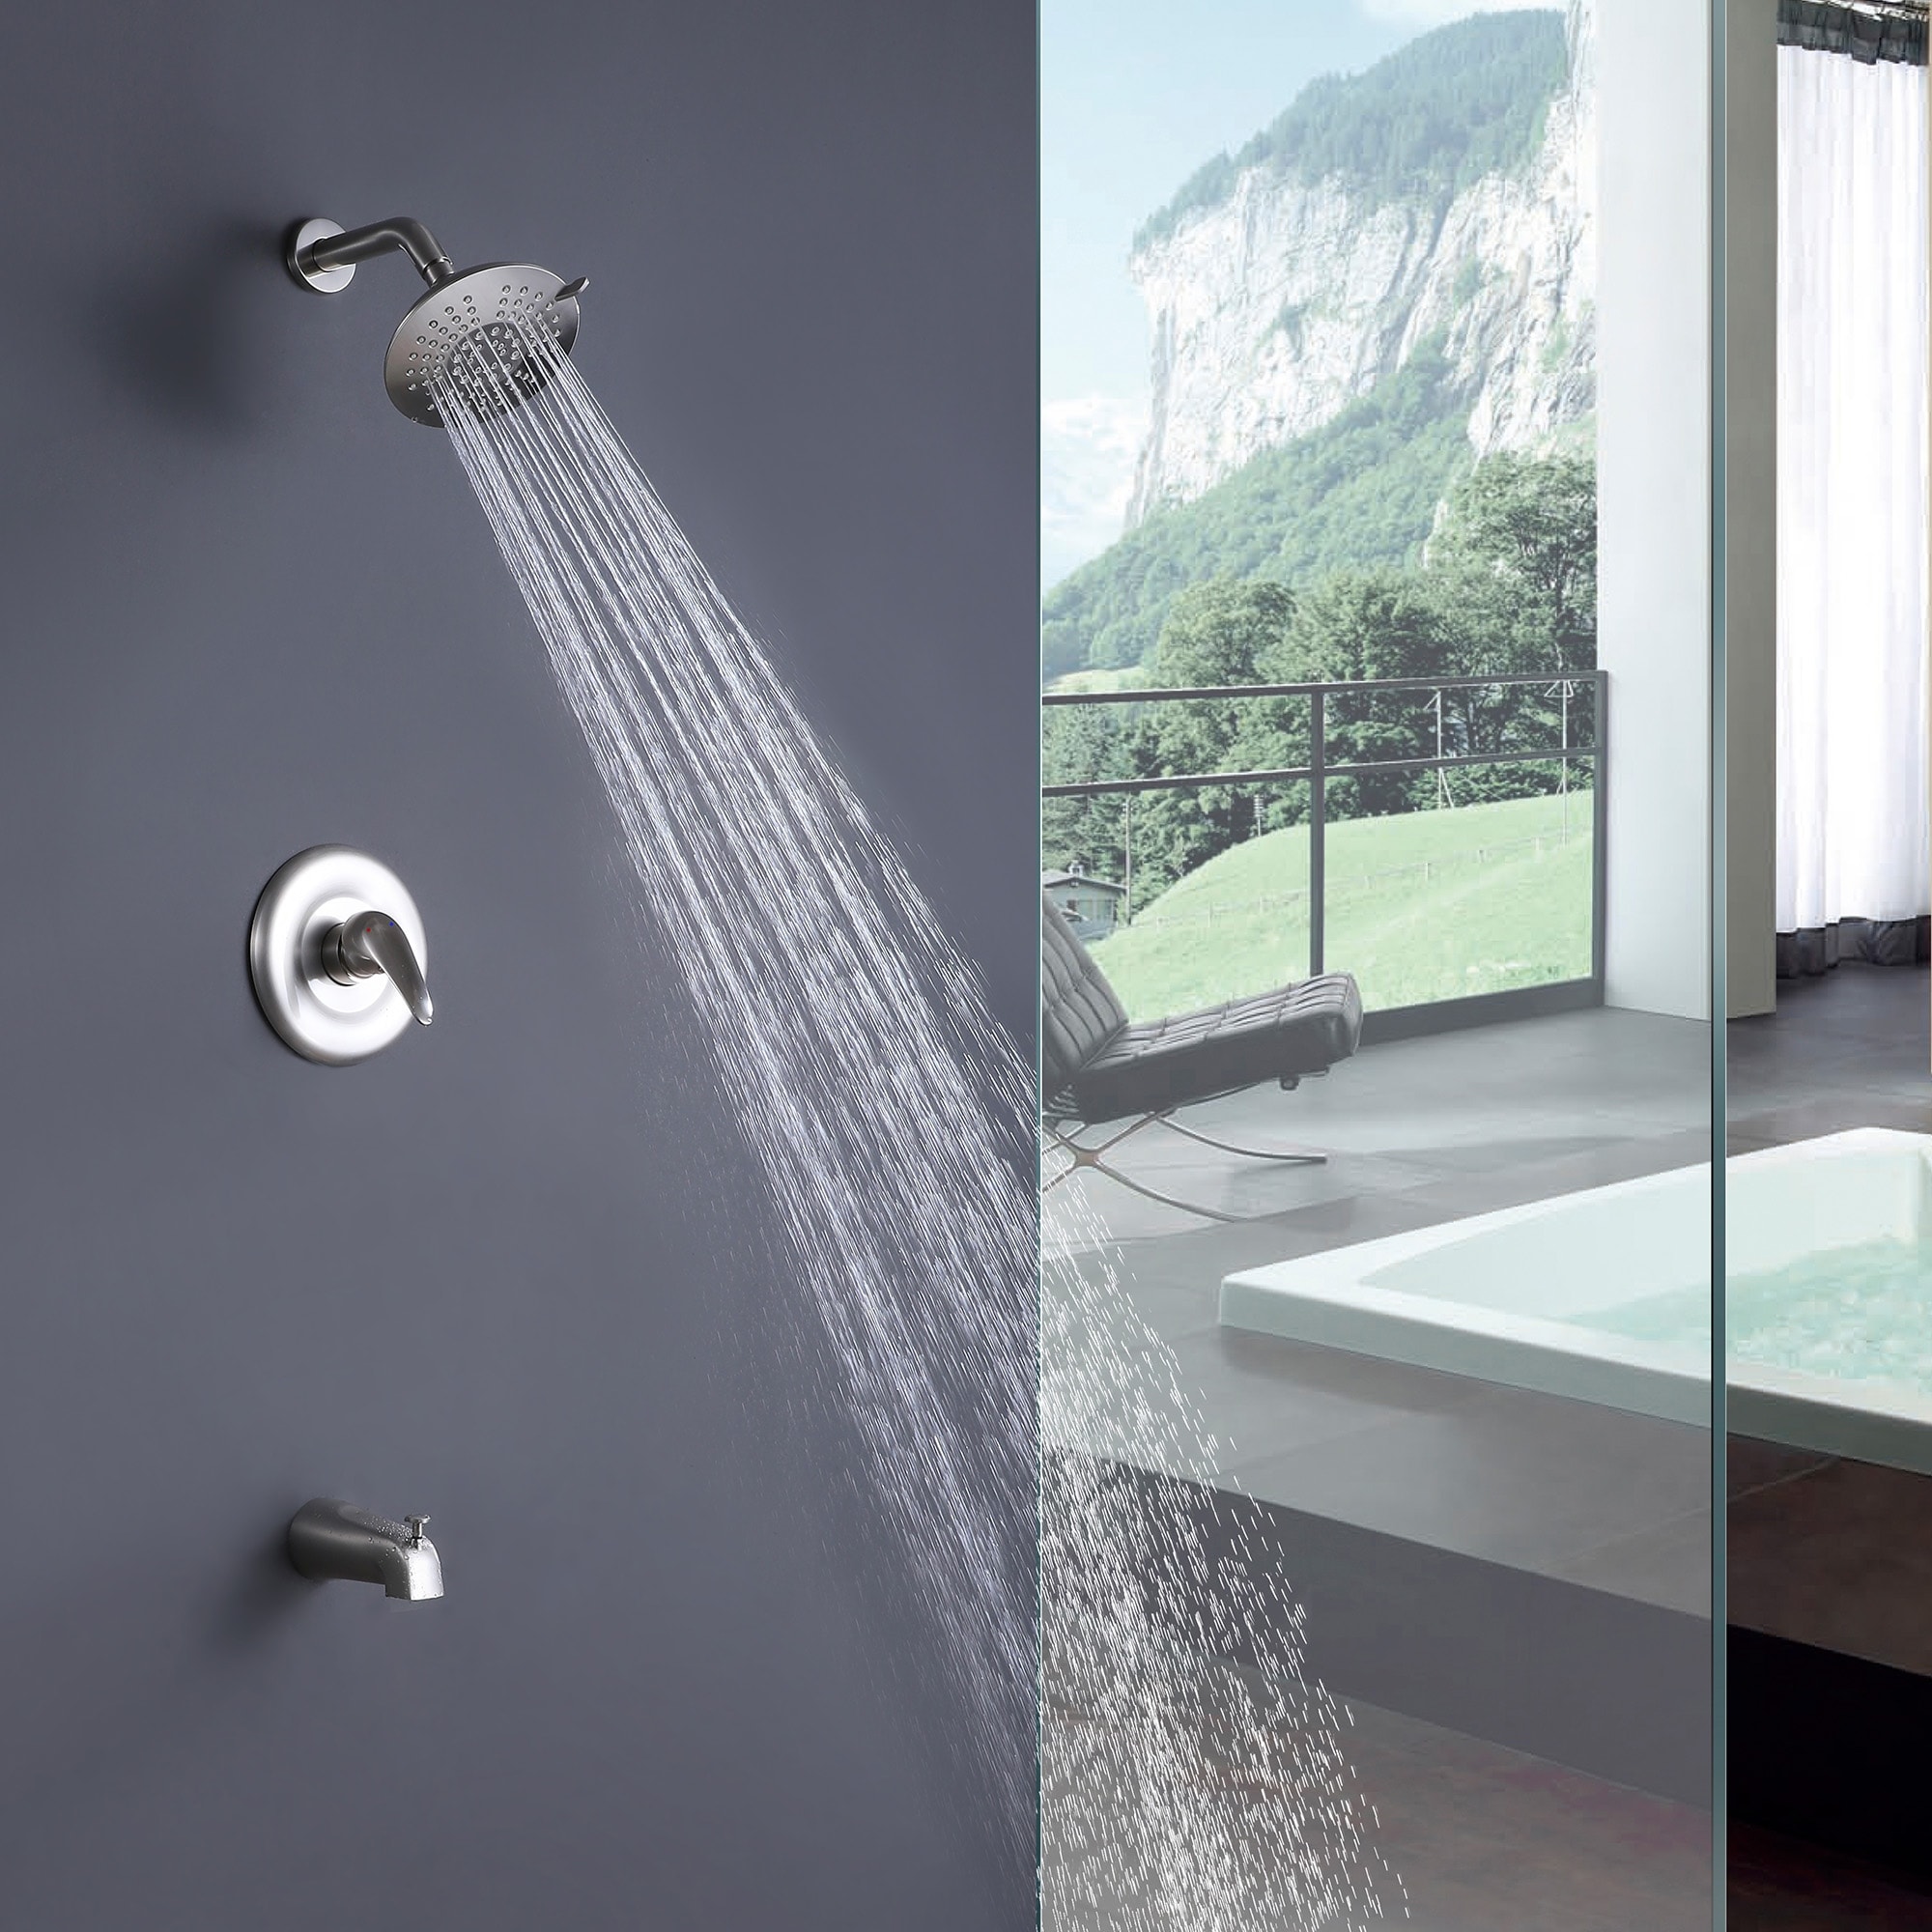 https://ak1.ostkcdn.com/images/products/is/images/direct/1c4cc2afe0b7df81913b7673f51344e7d24839e6/Wall-Mount-Tub-Shower-Faucet-With-Rough-in-Valve-Rain-Brushed-Nickel-Shower-System-With-6-Inch-Adjustable-Shower-Head-Kit-Set.jpg